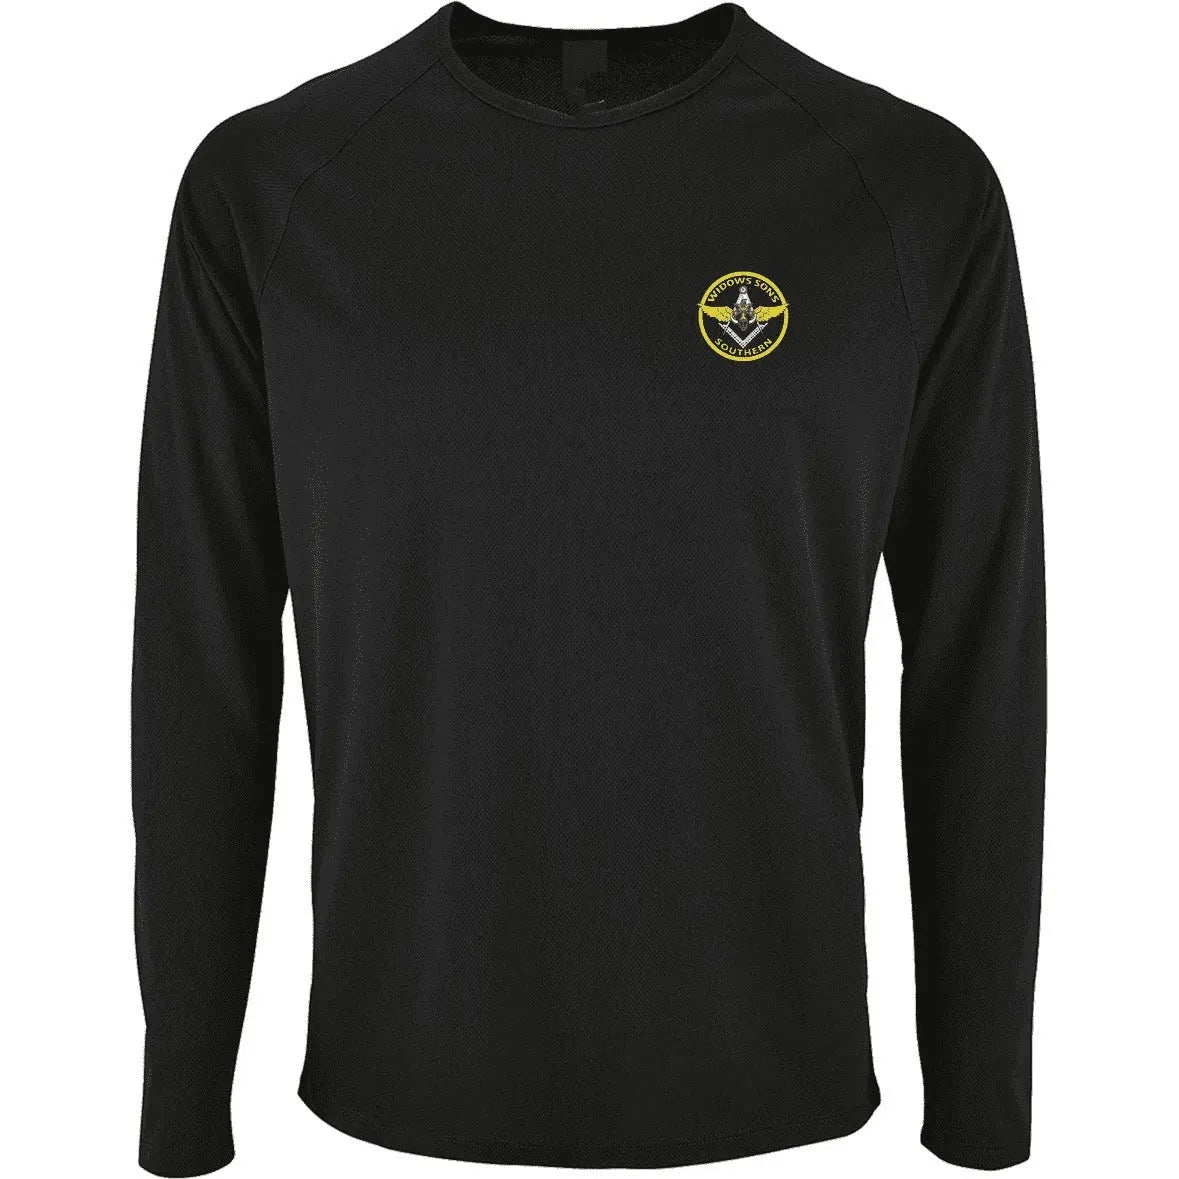 Southern Long-Sleeve Wicking T-Shirt redplume